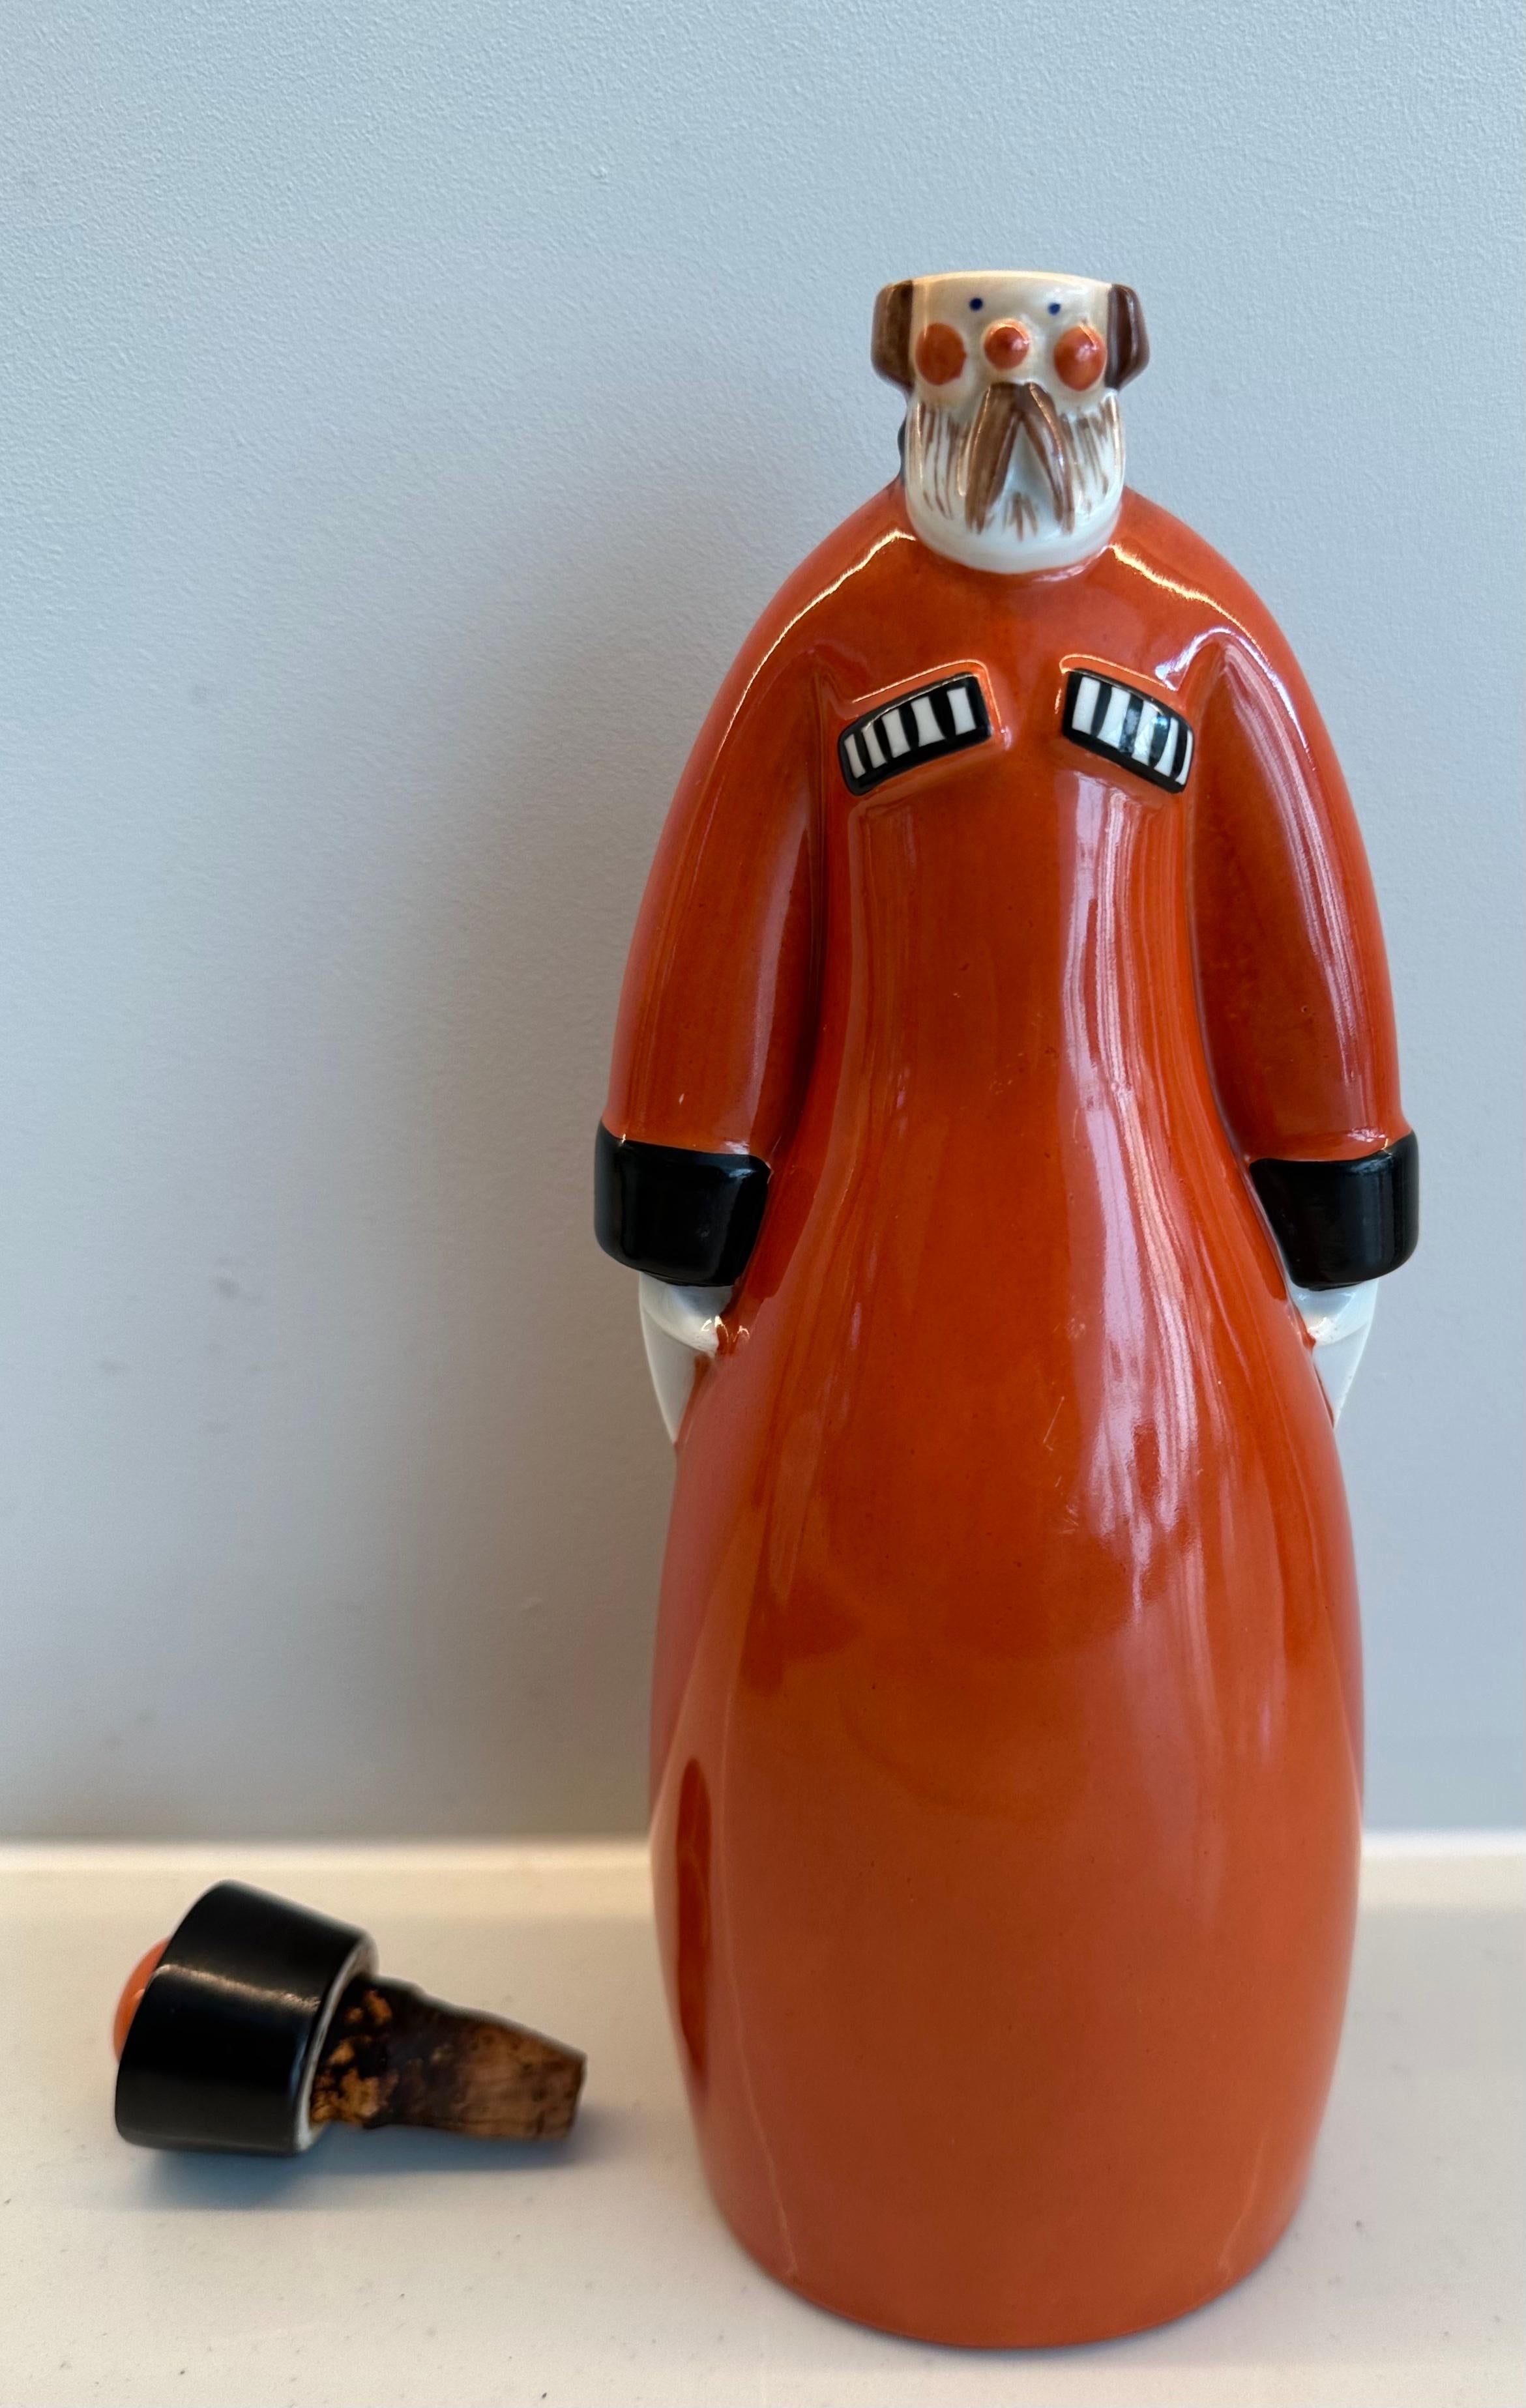 Art Deco 1930s French “Curacao” Figural Russian Soldier Flask by Robj Paris For Sale 10